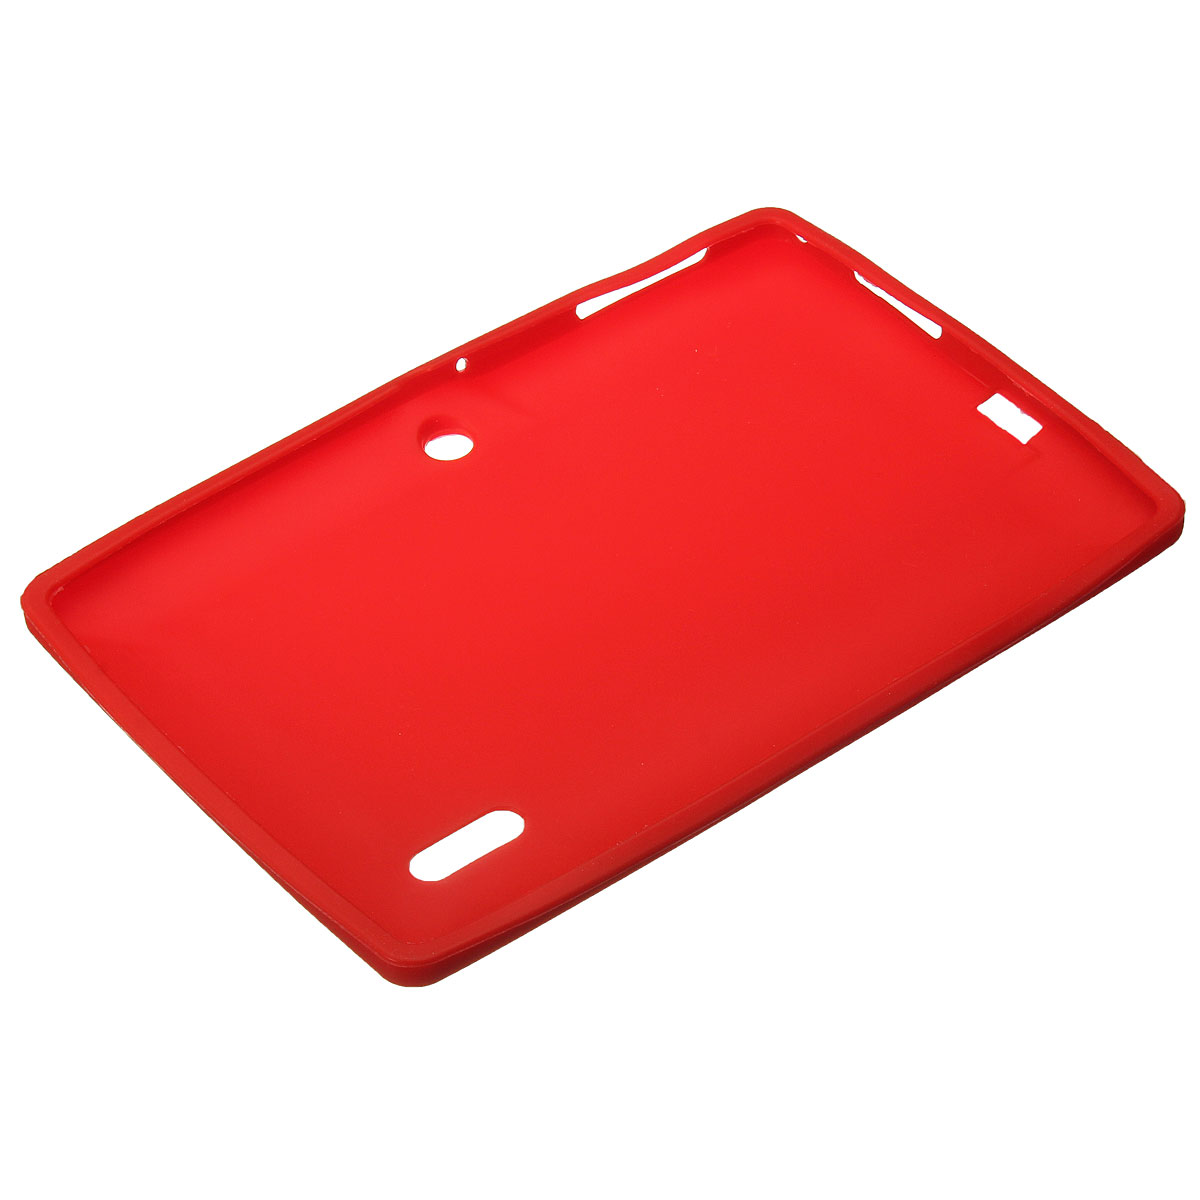 Multi-color-Soft-Silicone-Protective-Back-Cover-Case-For-7-Inch-Tablet-PC-1974994-4